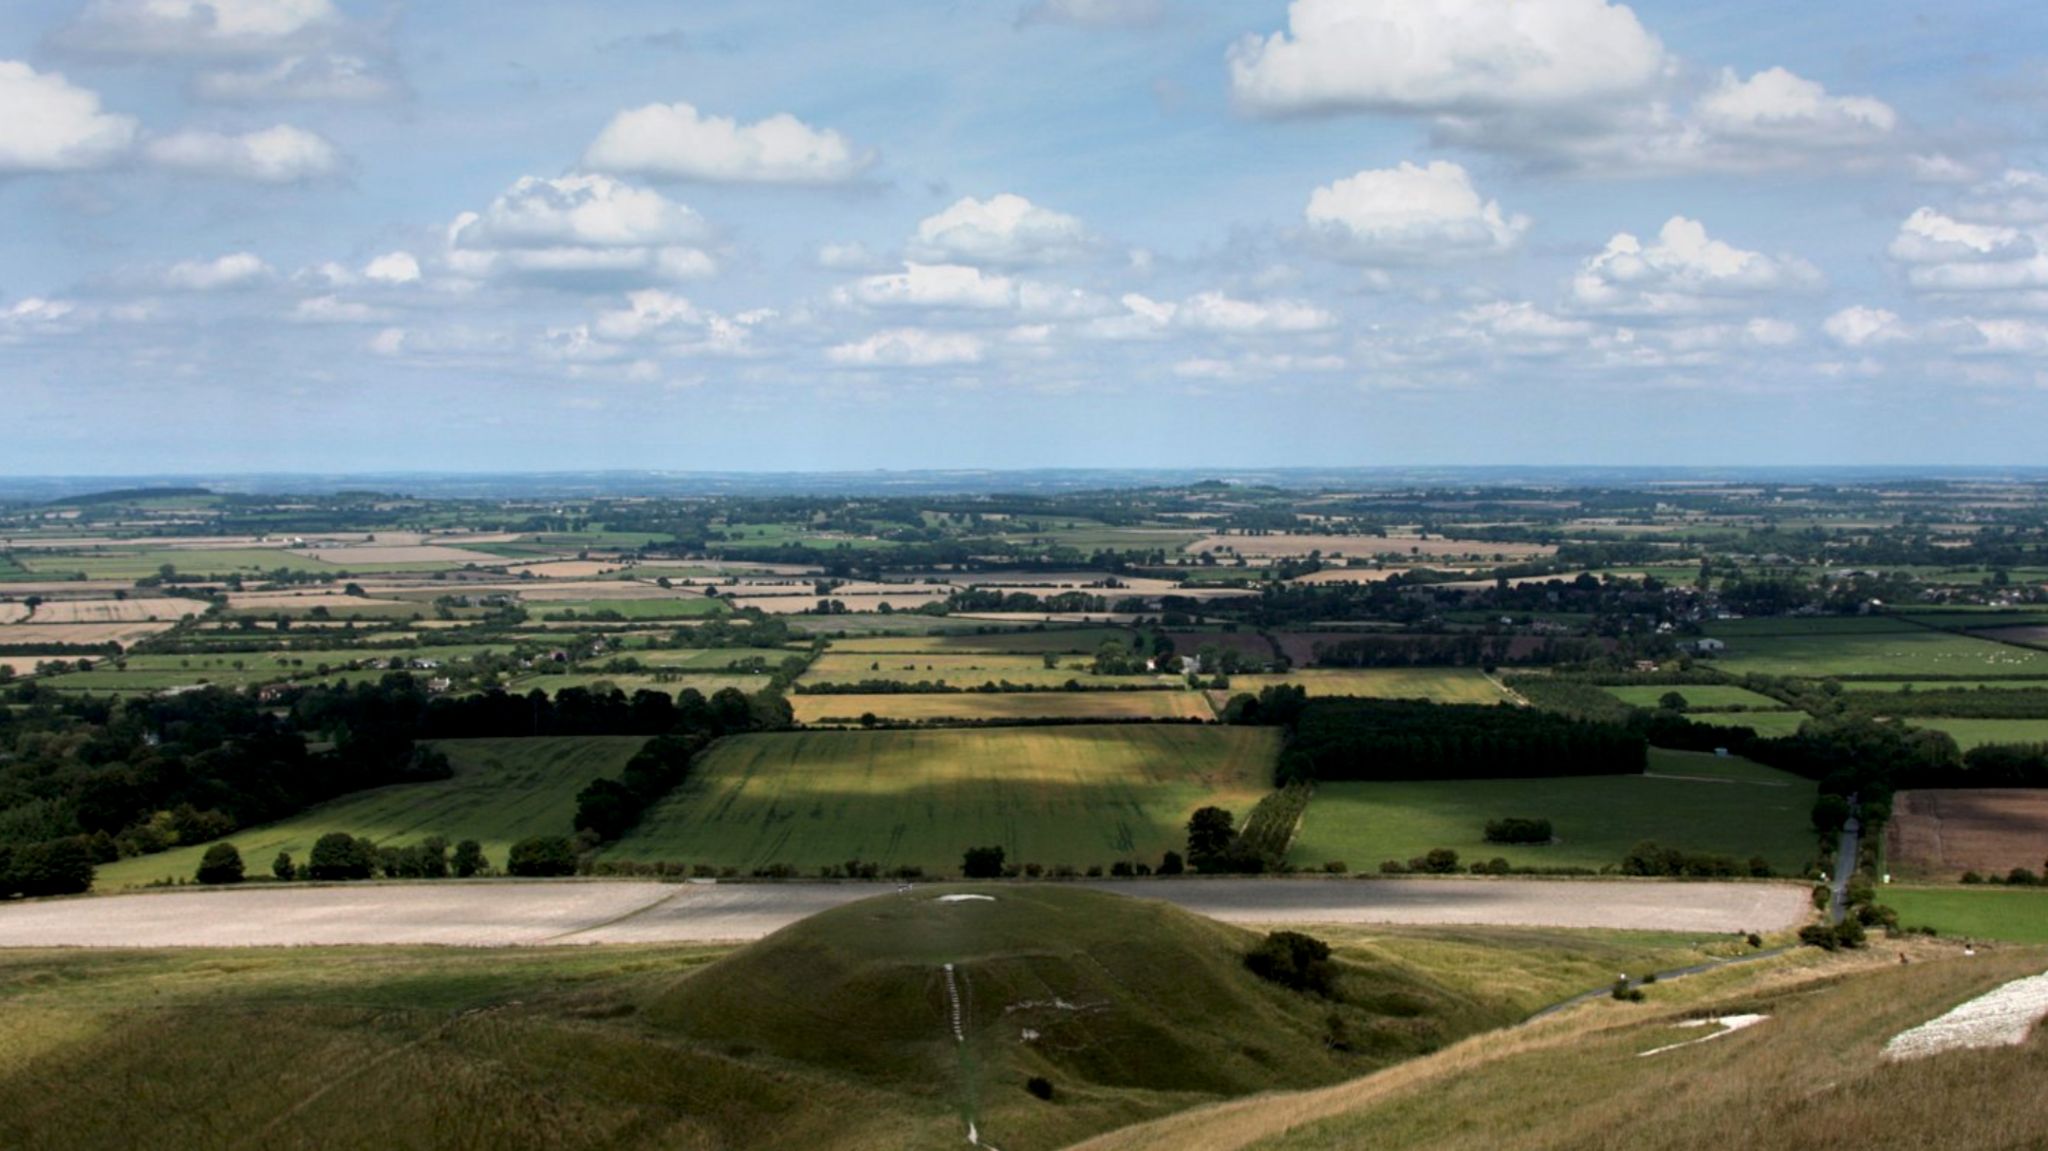 North Wessex Downs landscape seen from above showing hills and fields